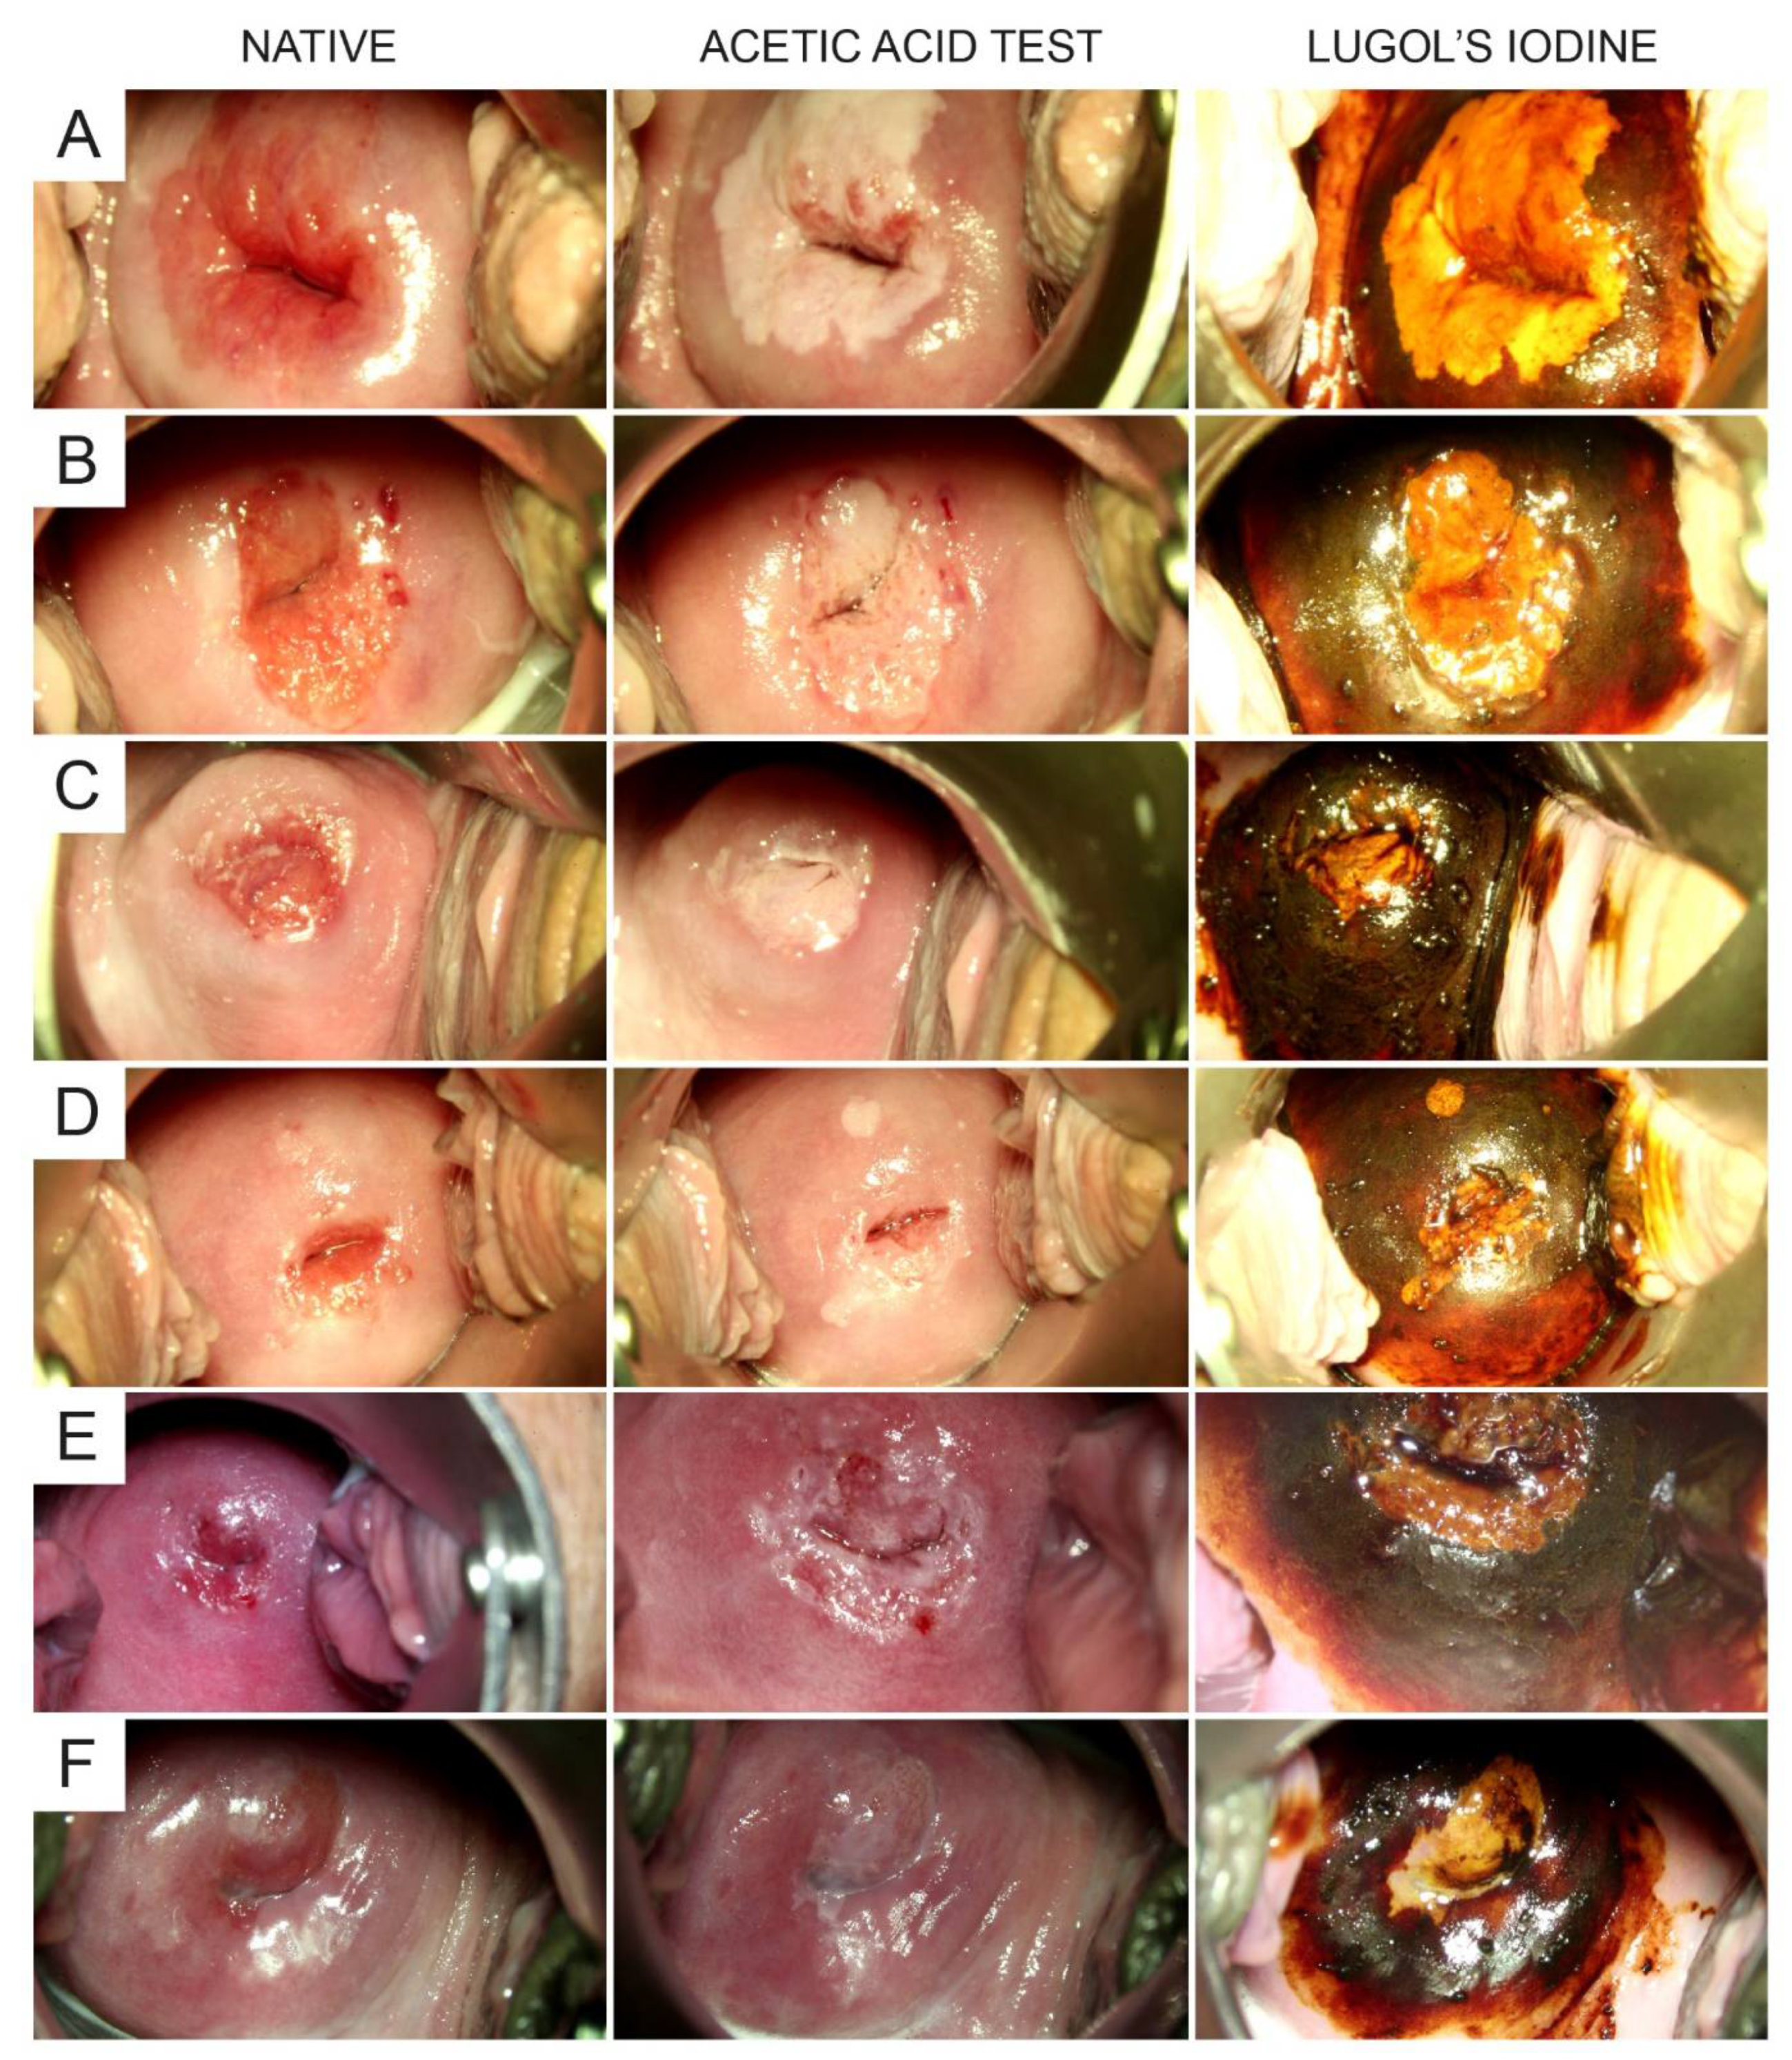 Atlas of visual inspection of the cervix with acetic acid for